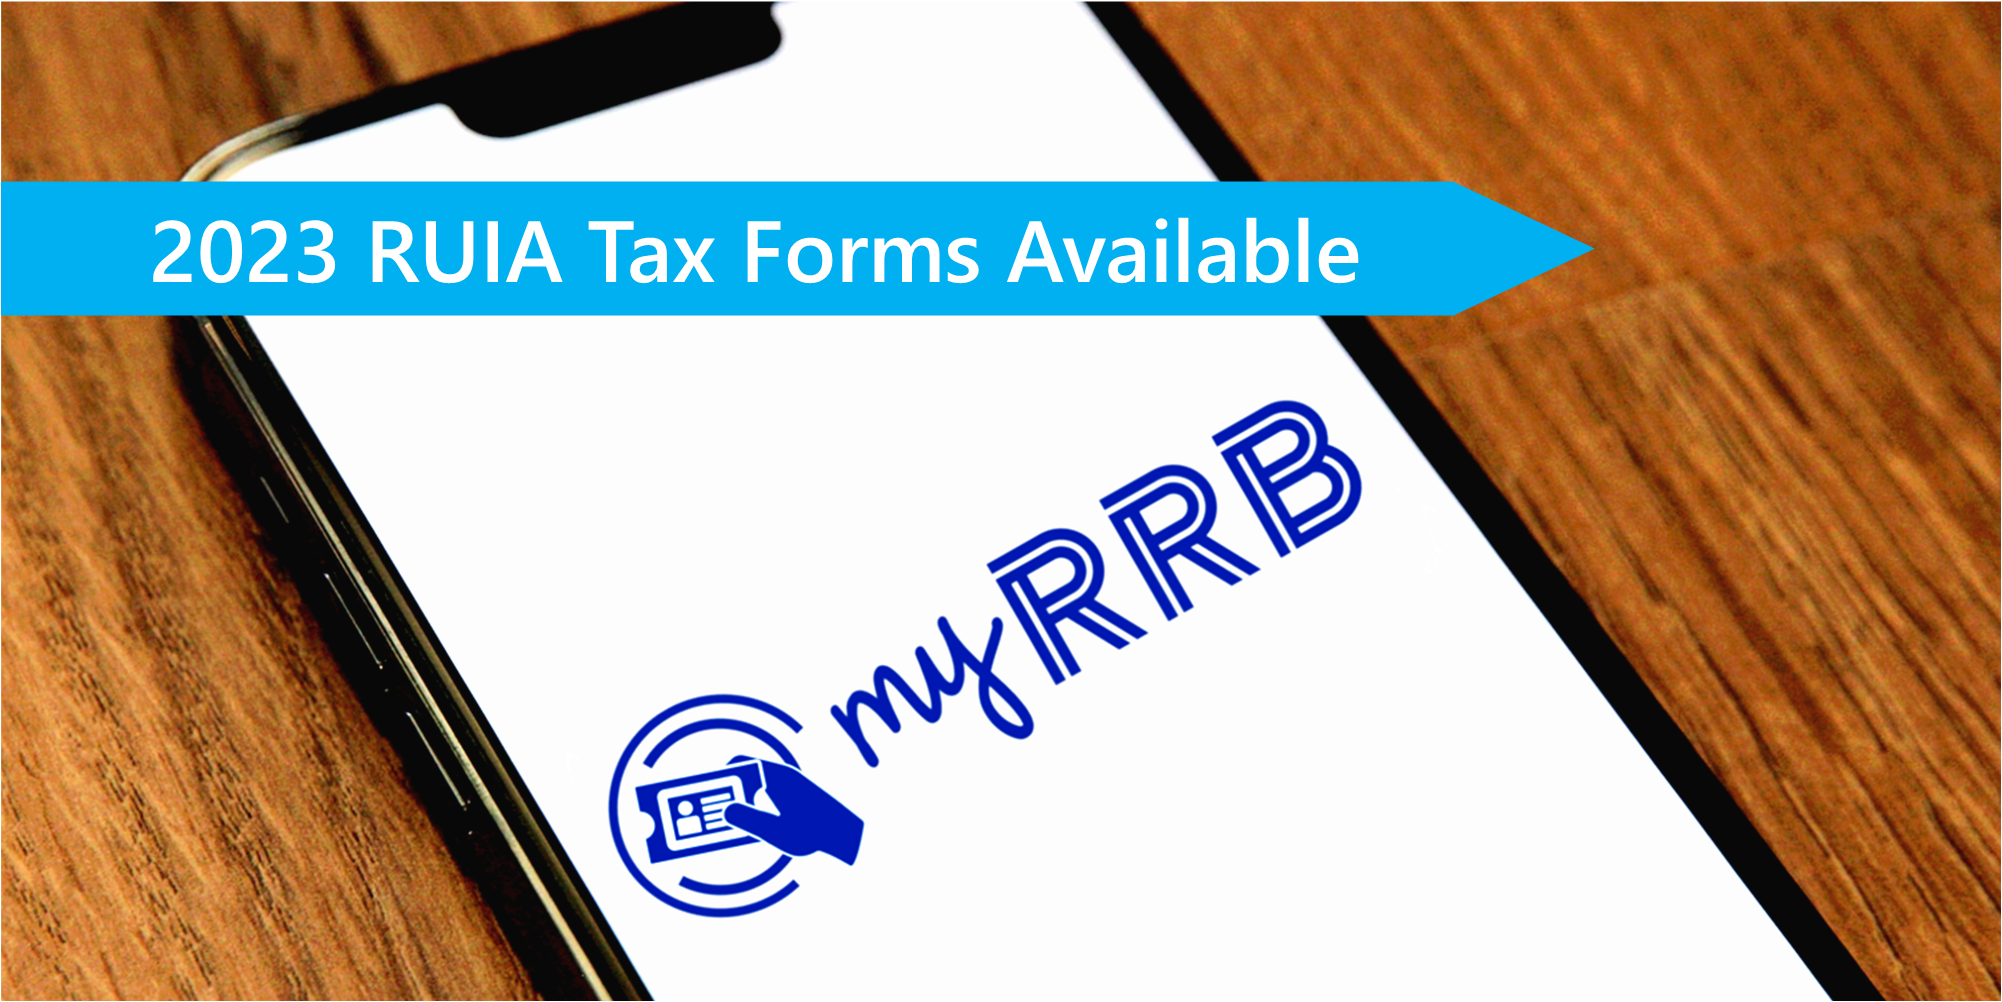 cell phone with myRRB logo on screen and banner reading 2023 RUIA Tax Forms Available